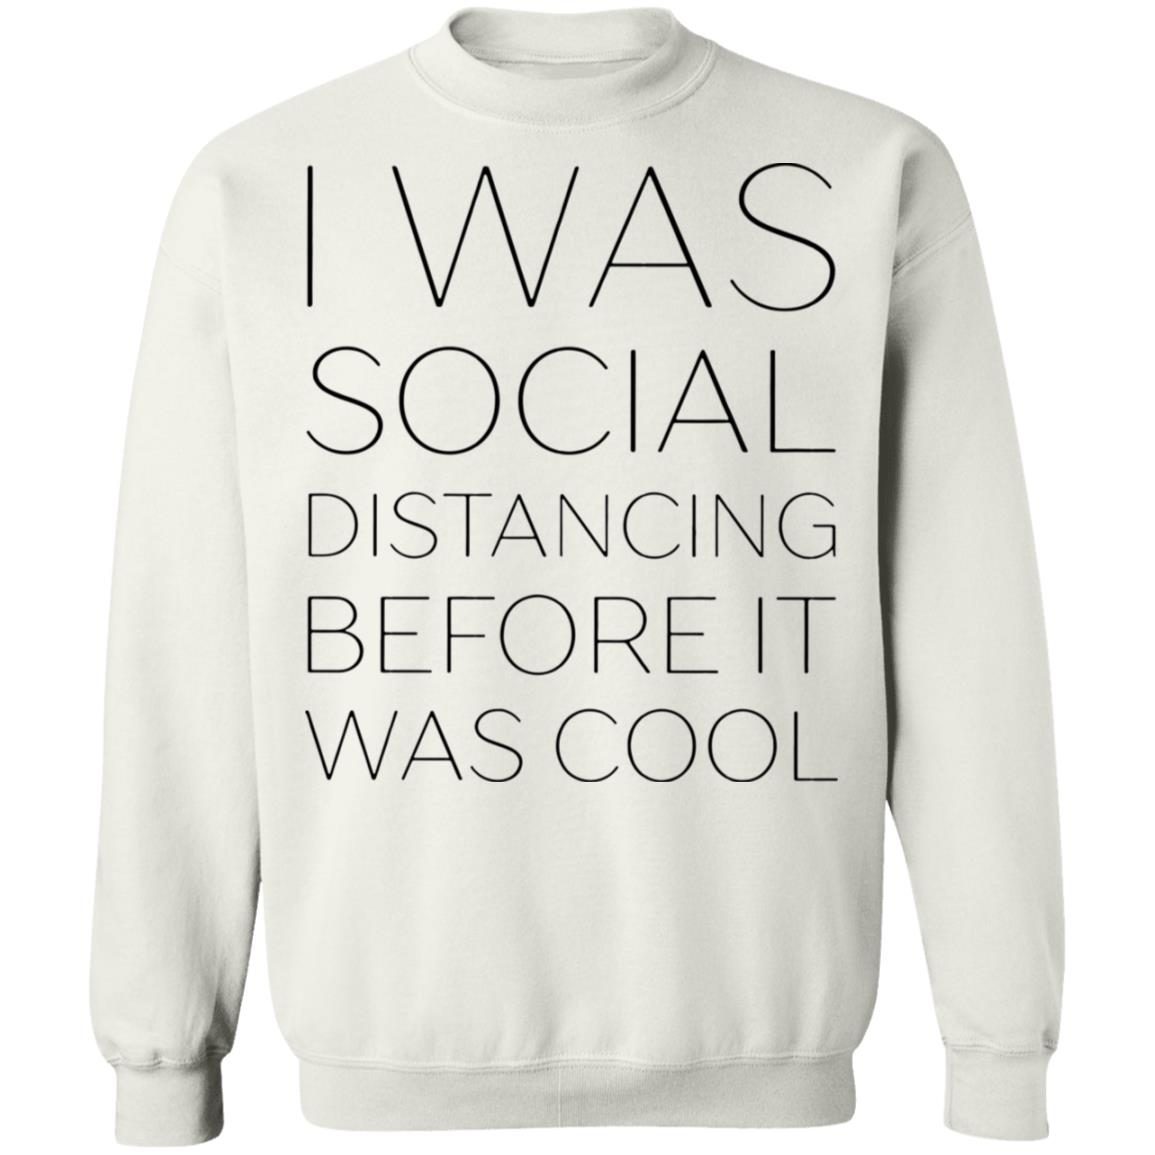 I Was Social Distancing Before It Was Cool shirt 4